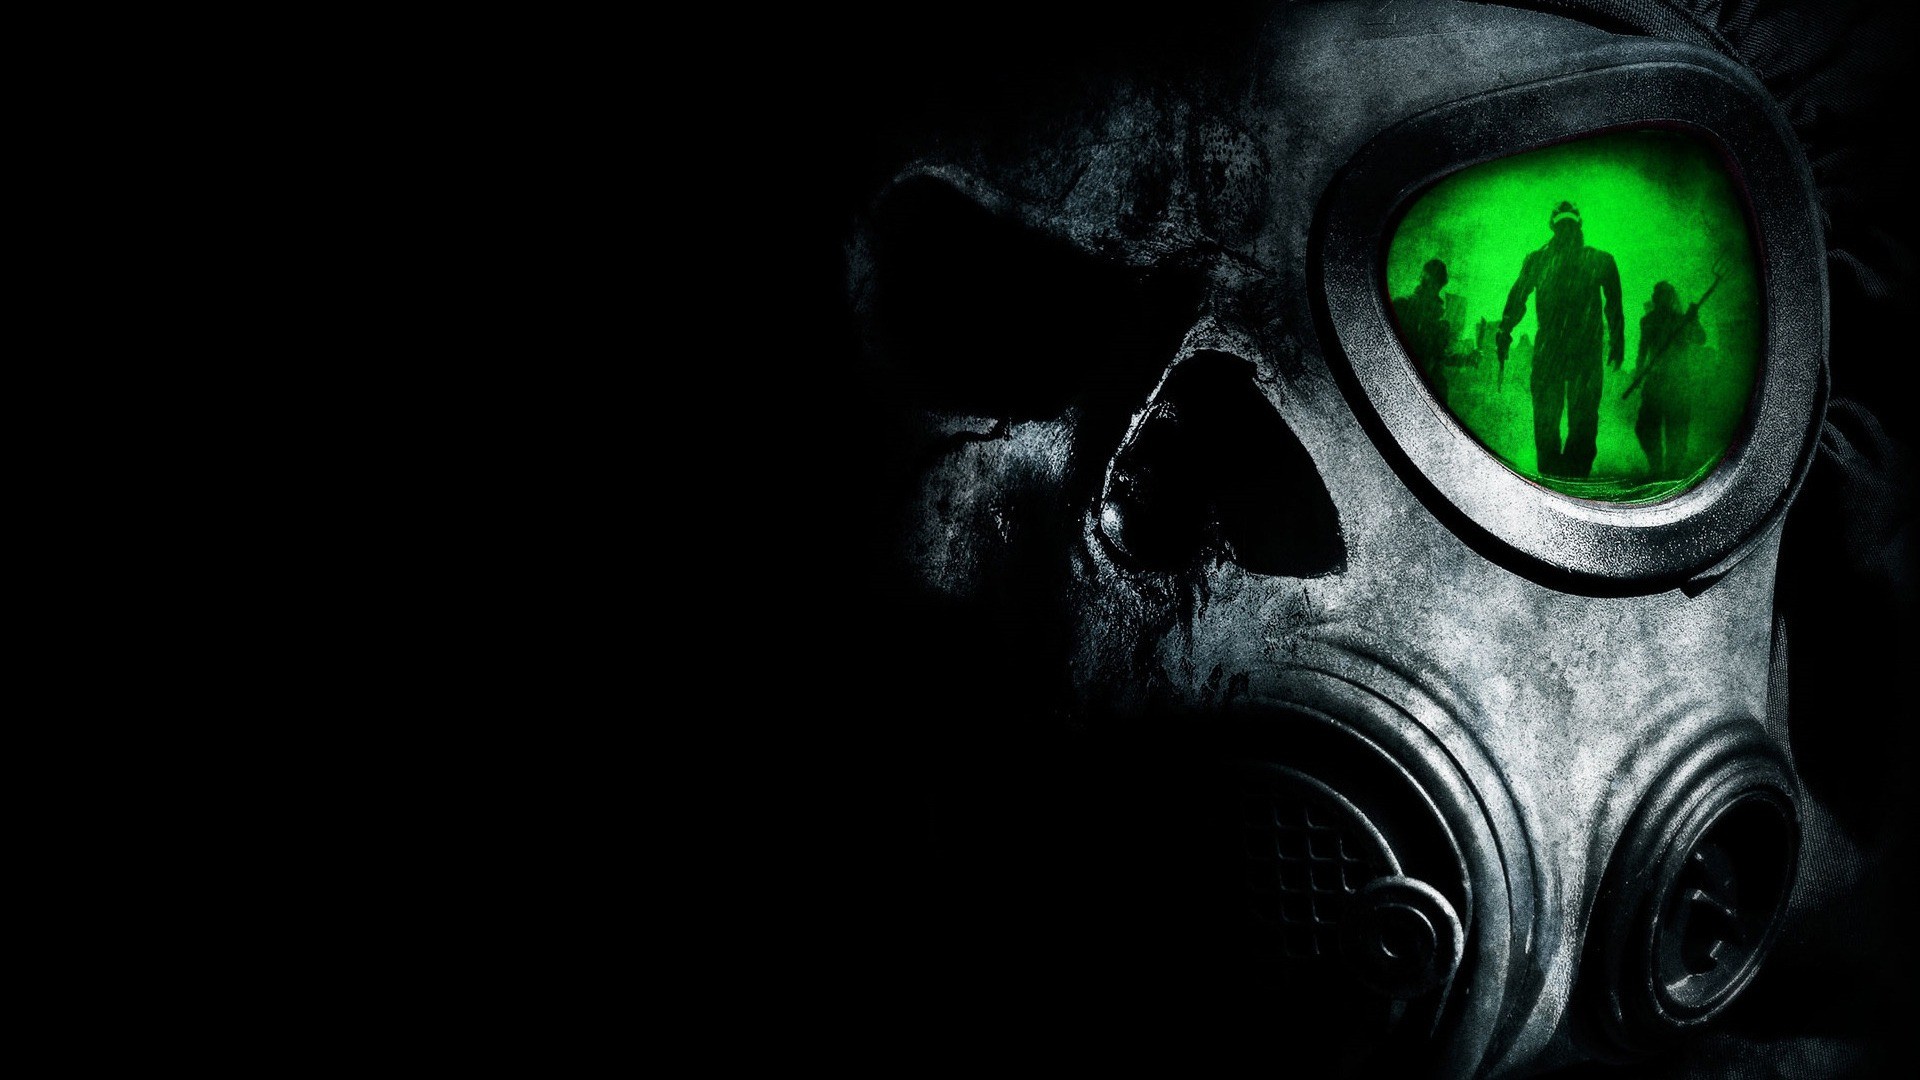 1920x1080 ... Free Scary Desktop Backgrounds - Wallpaper Cave ...